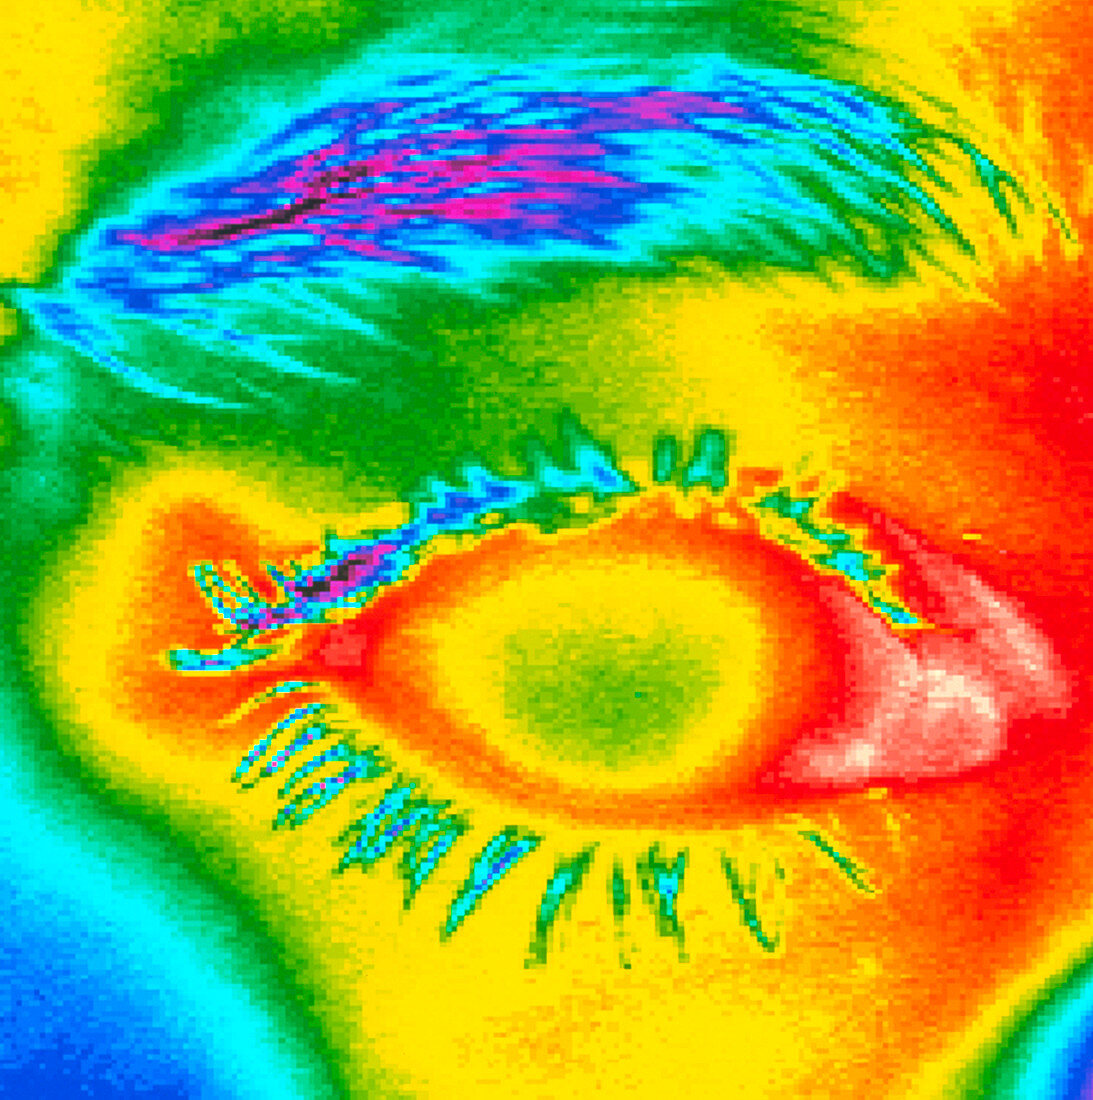 Thermogram of a close-up of a human eye